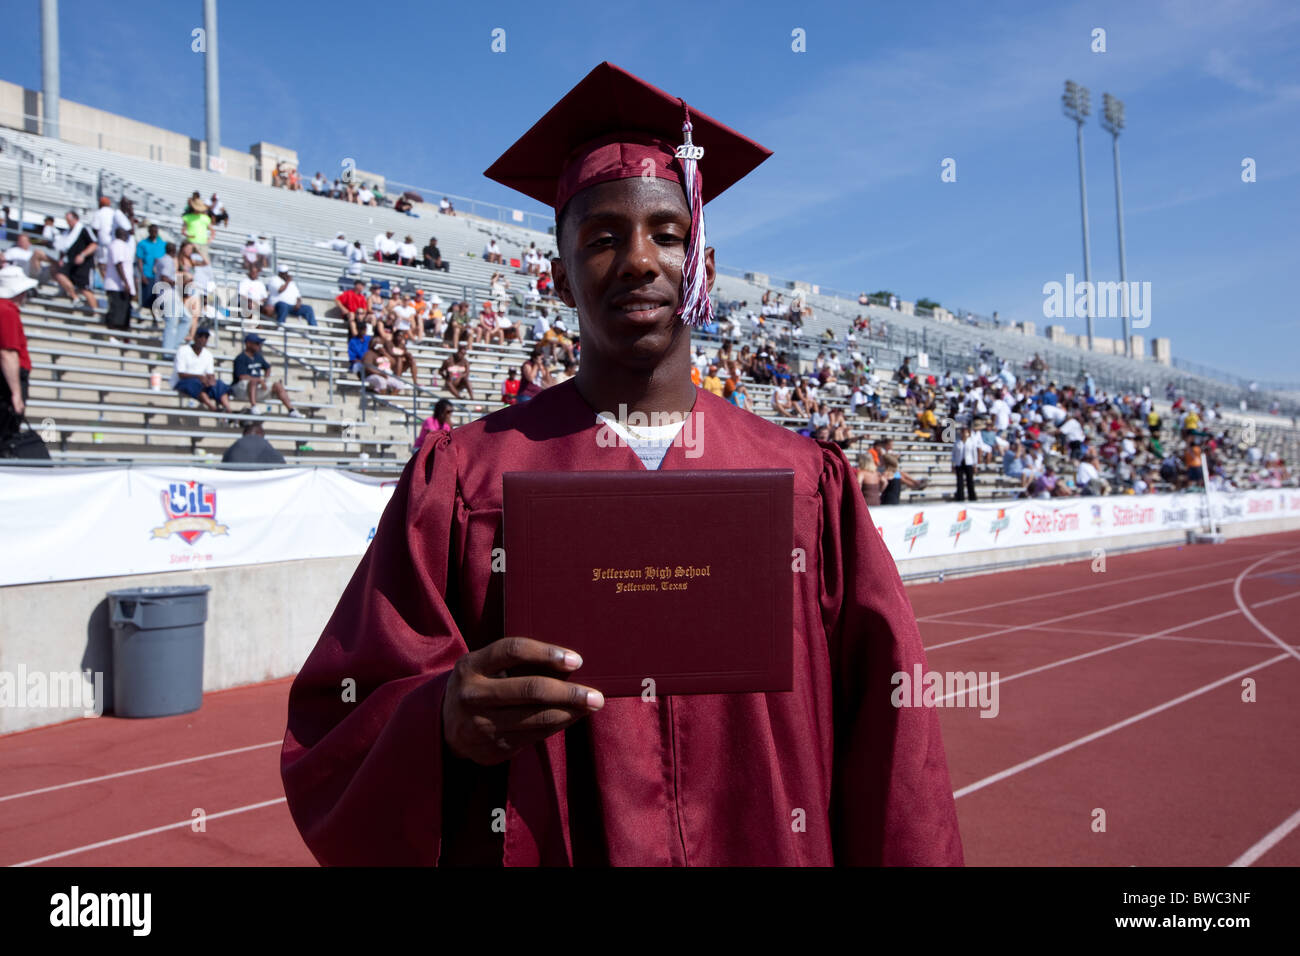 African-American student displays high school diploma at outdoor graduation ceremony taken place during the state track meet Stock Photo